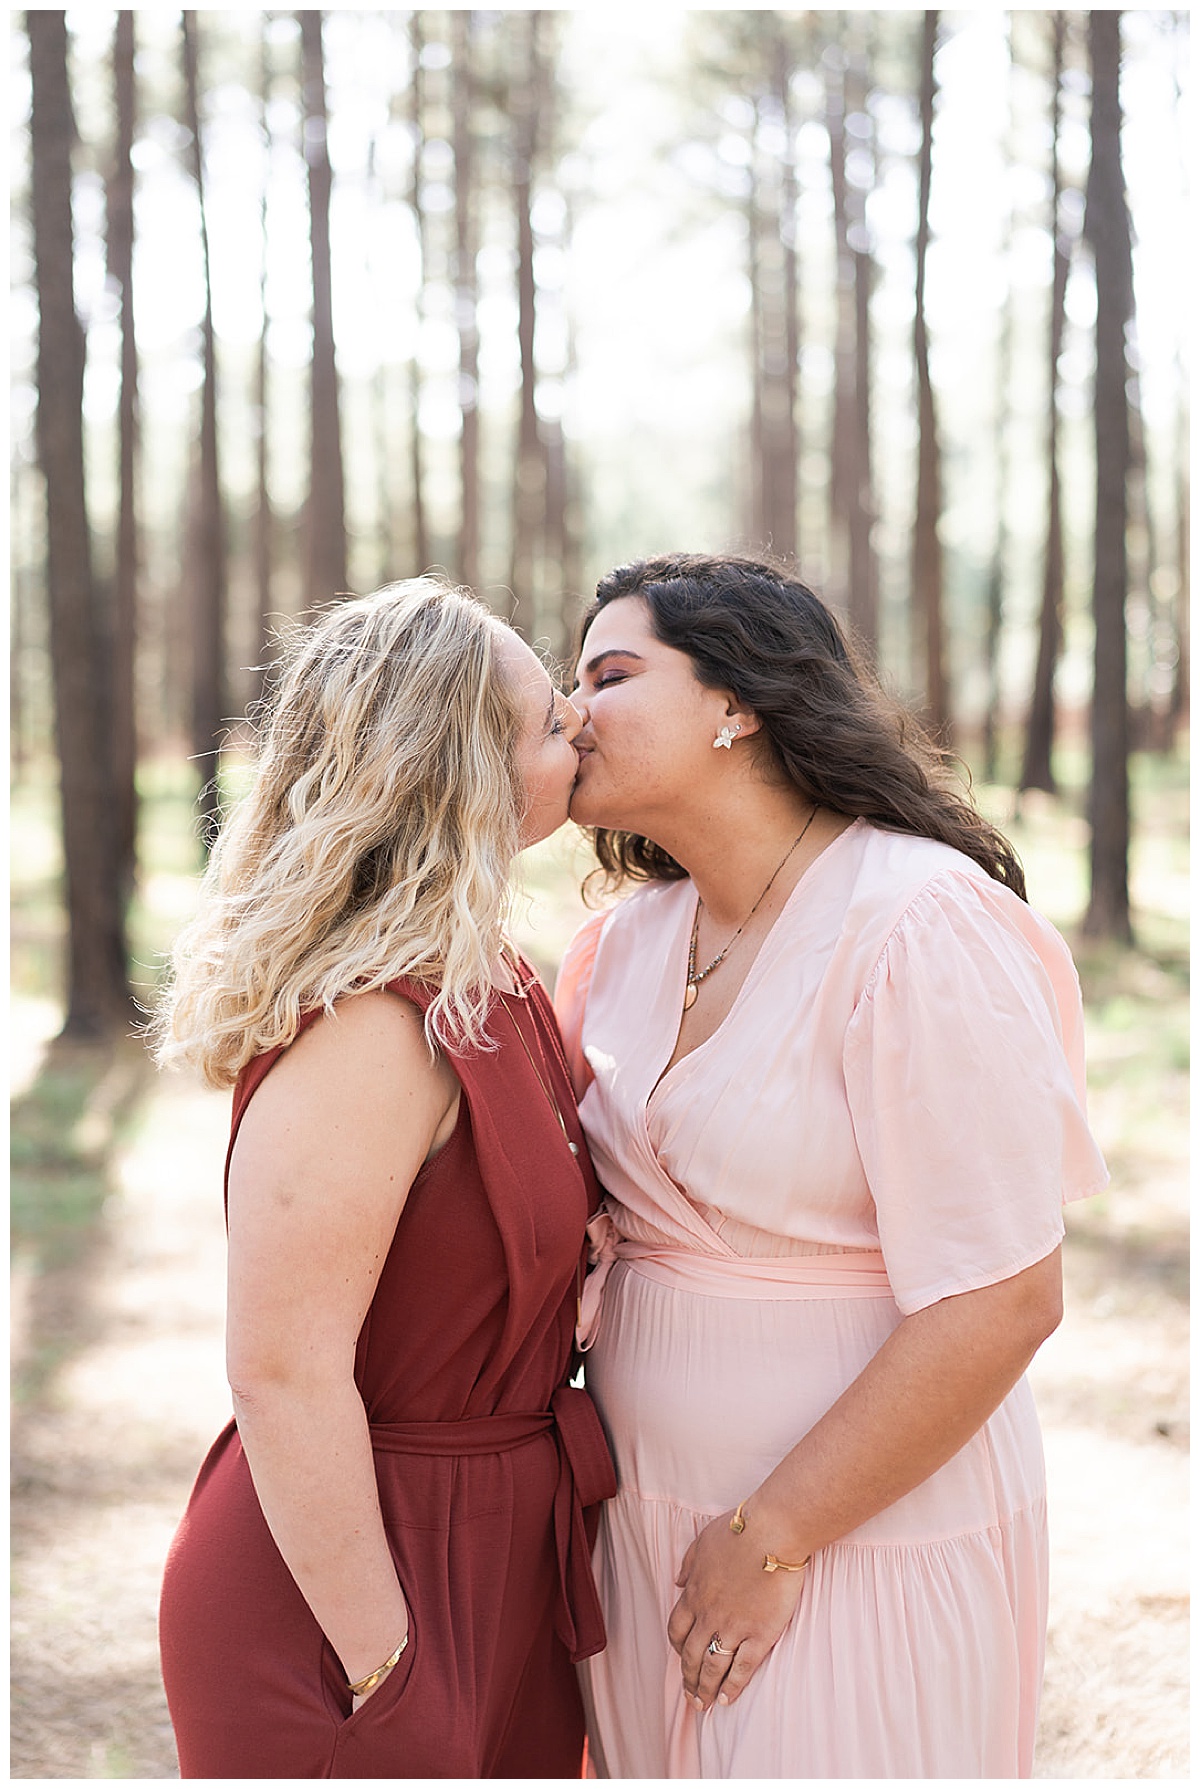 Two women share a passionate kiss for WG Jones Park Engagement Session 